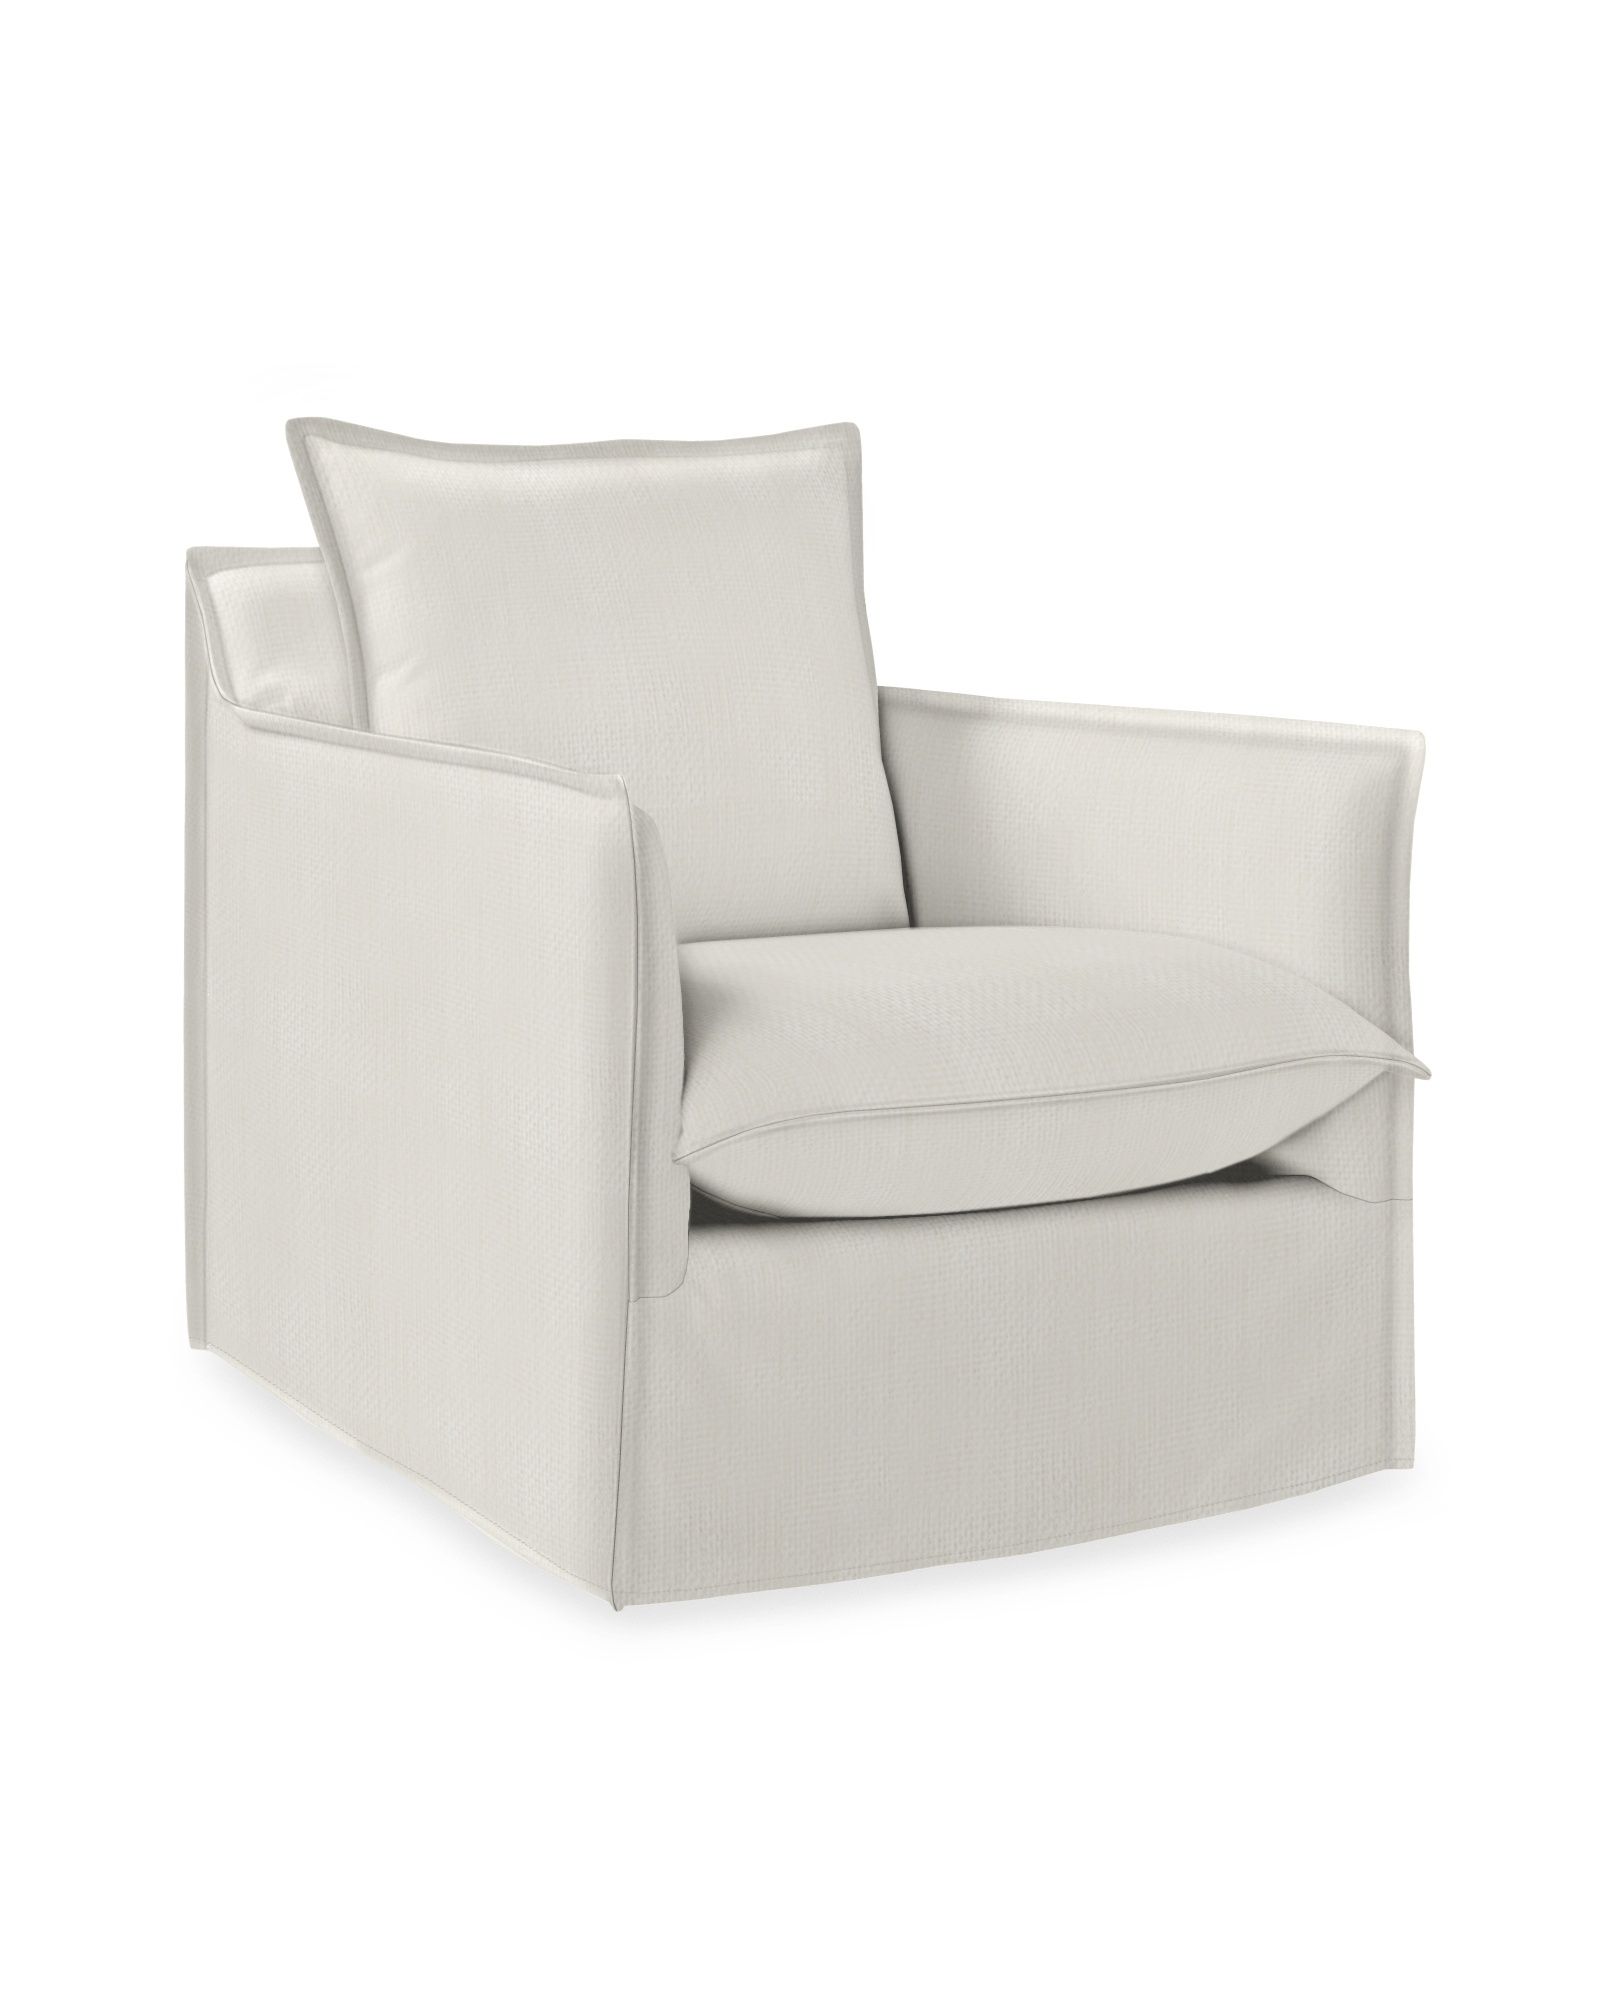 Sundial Outdoor Swivel Chair | Serena and Lily